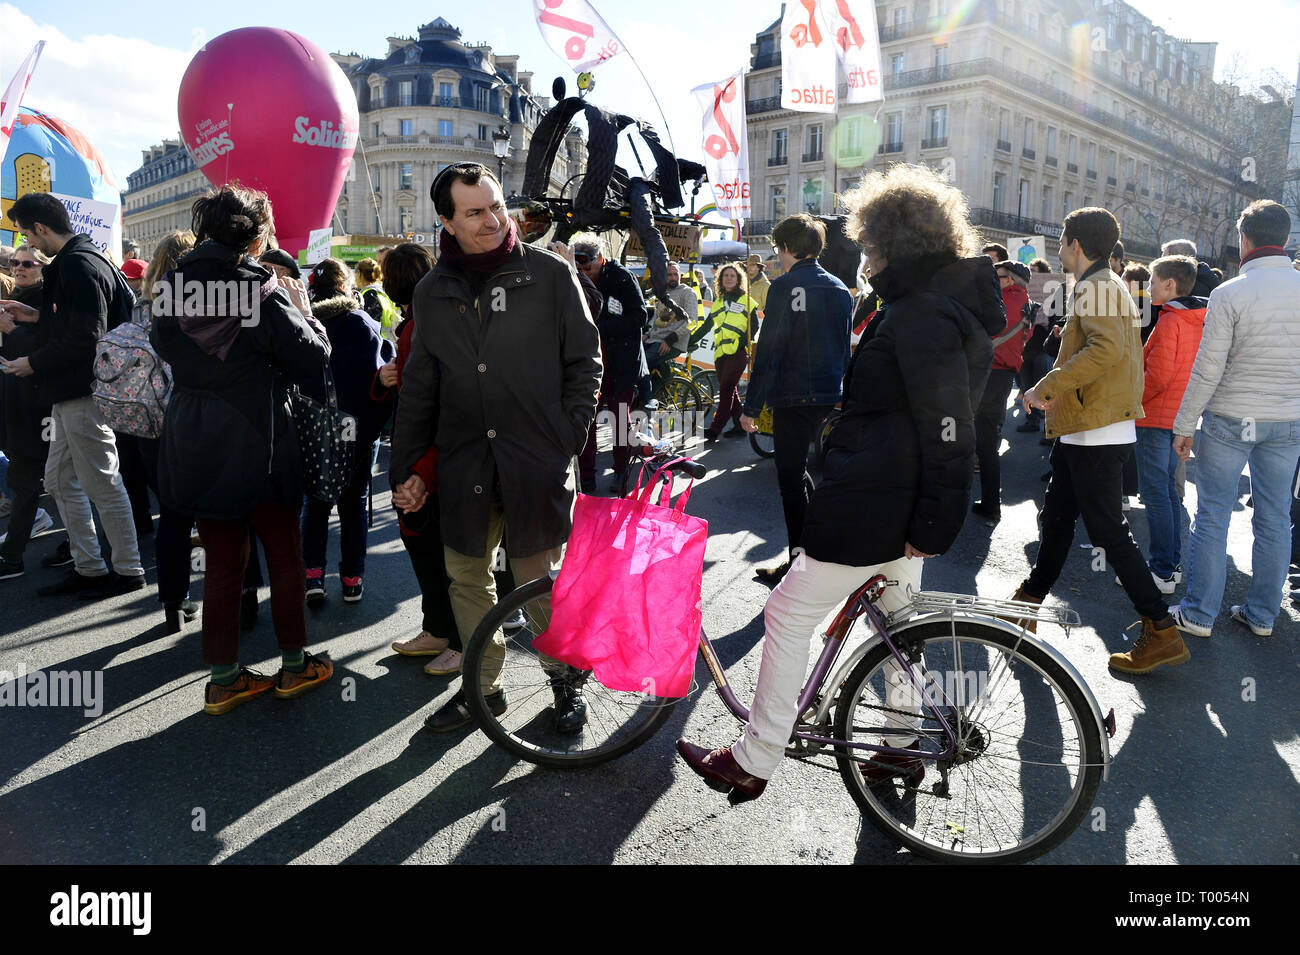 The March of the Century - Paris, France. 16th March 2019. 45 000 people took part in the demonstration against climate change (La Marche du Siécle) in Paris on the 16th march 2019 Credit: Frédéric VIELCANET/Alamy Live News Stock Photo